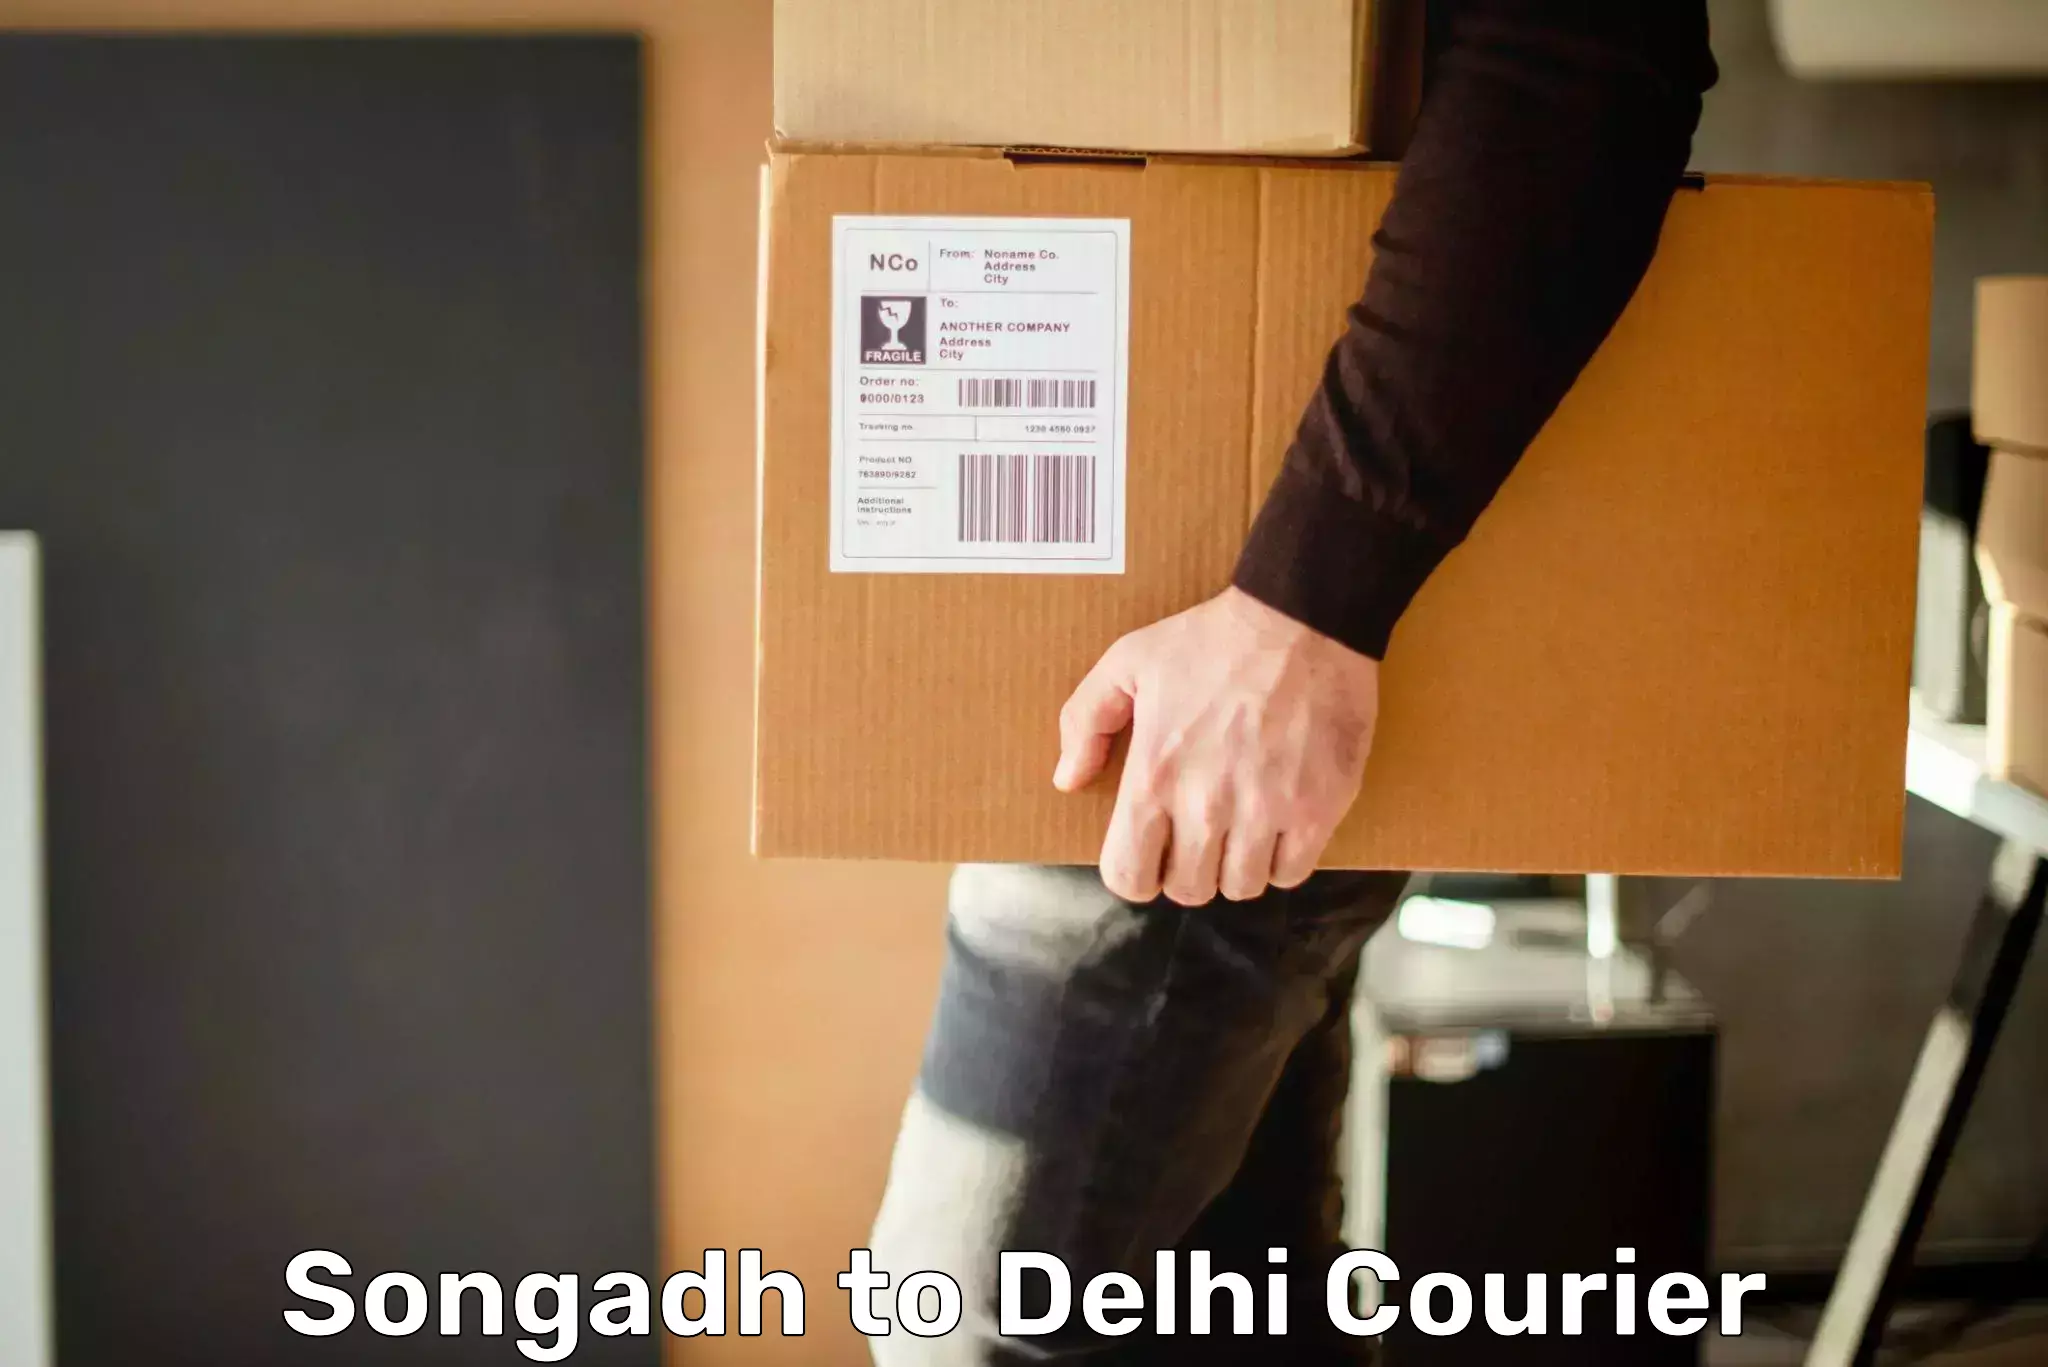 Flexible delivery schedules Songadh to Delhi